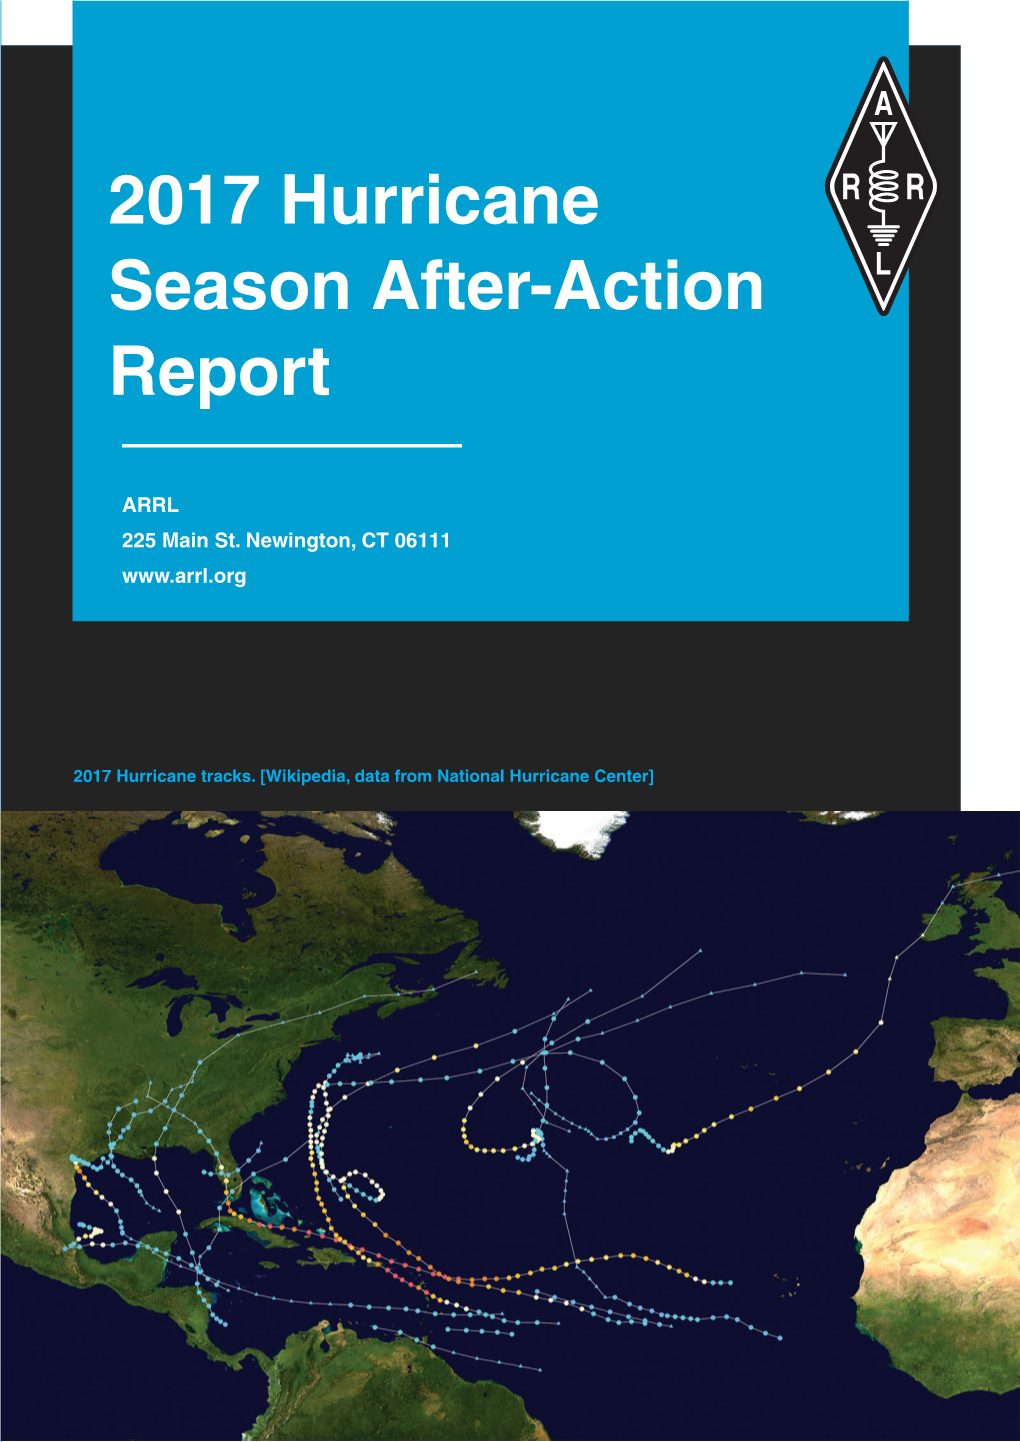 2017 Hurricane Season After-Action Report